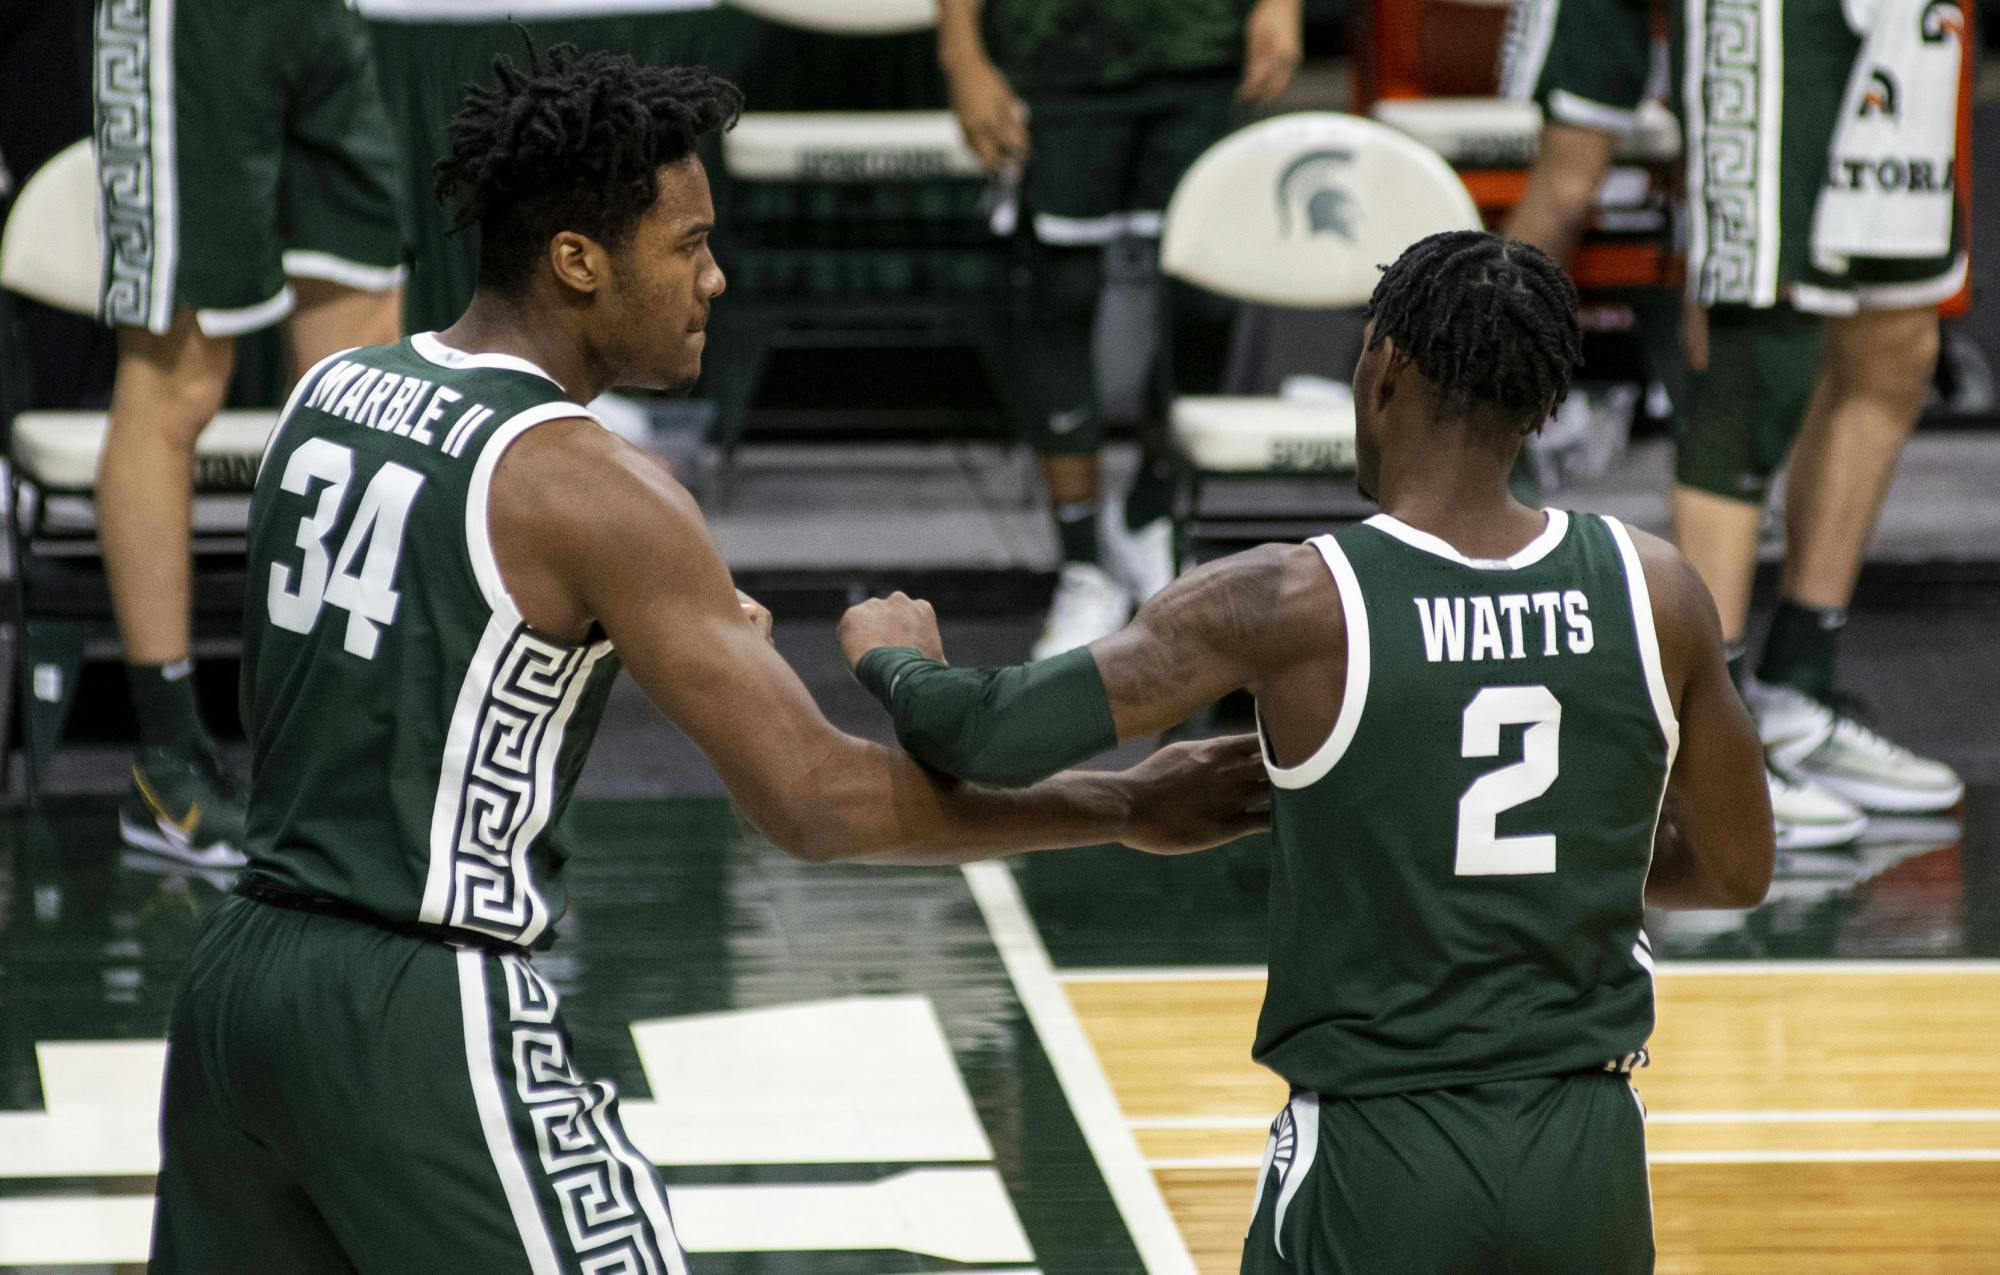 Sophomore forward Julius Marble (34) talks with teammate Rocket Watts (2) as they head into a timeout in the second half. The Spartans came back after the first half to pull out a 109-91 win on Dec. 13, 2020.